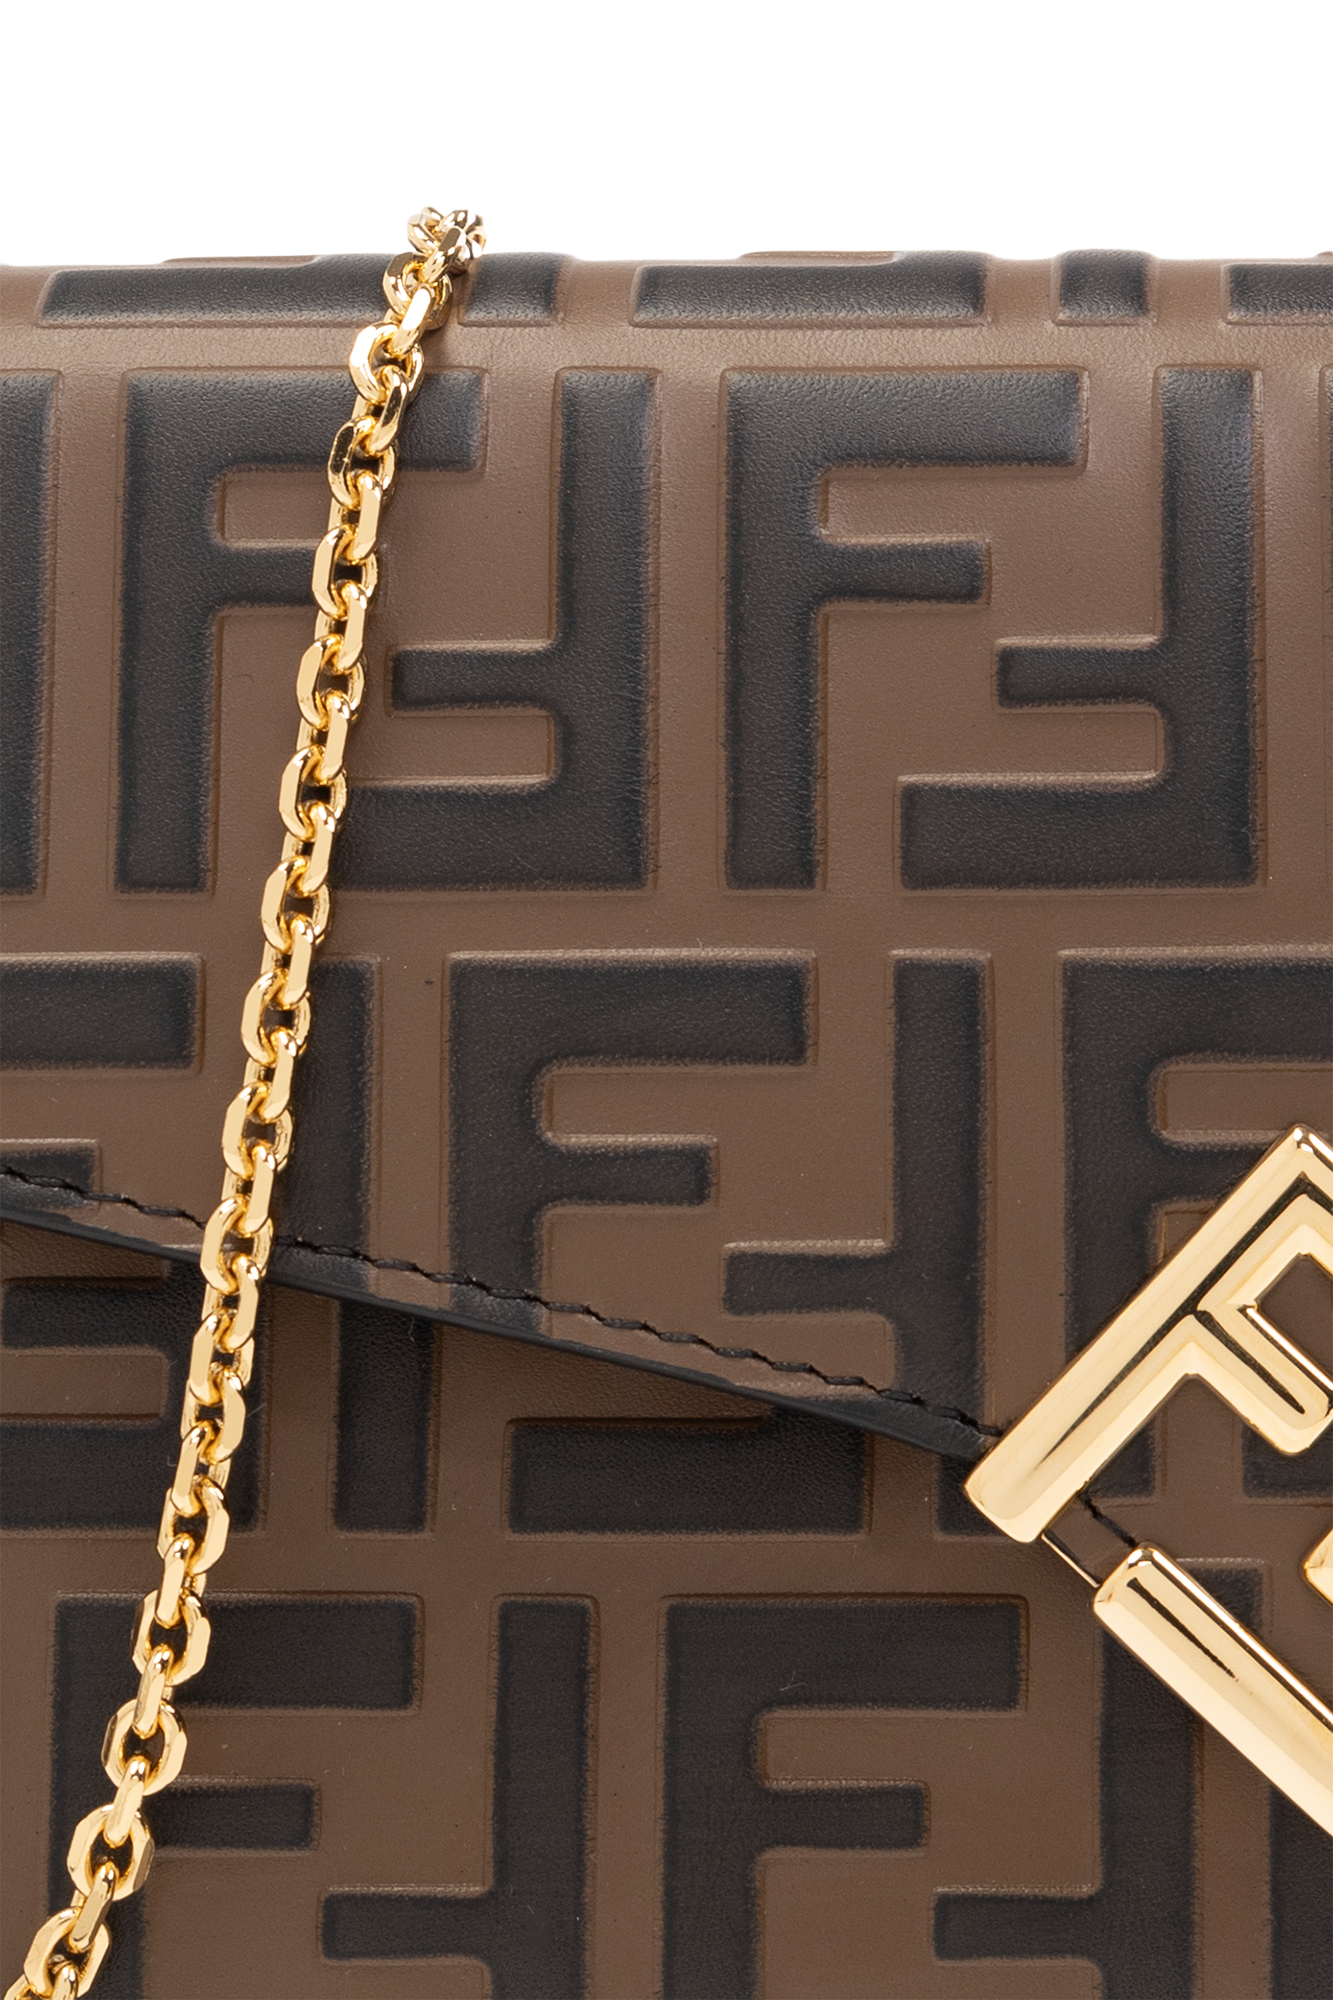 Fendi Brown Continental Ff Leather Chain Wallet